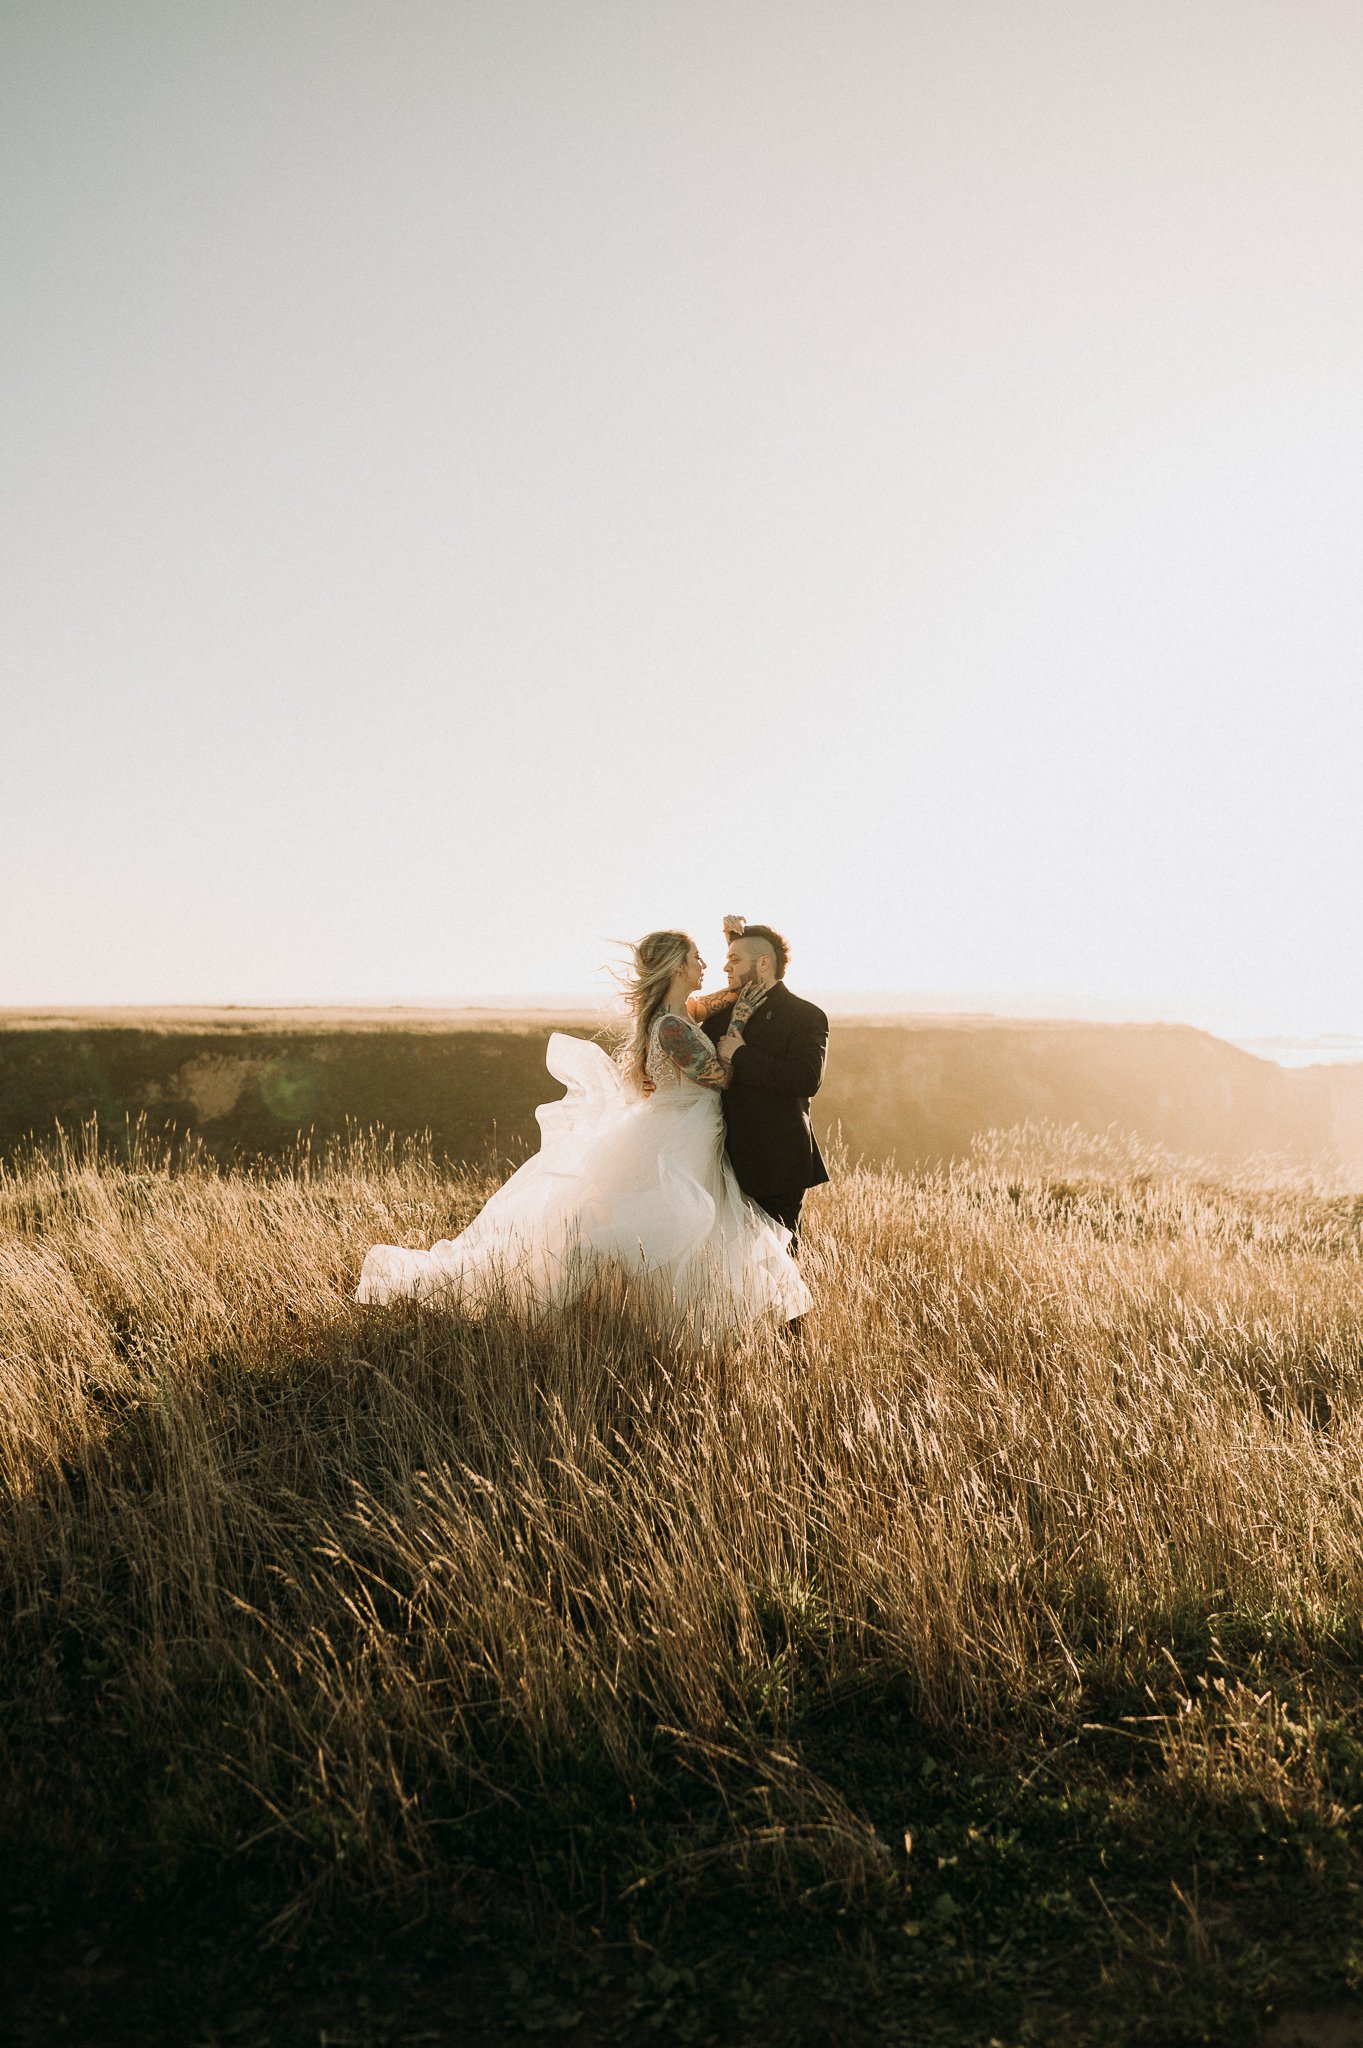 Bride and groom on open grassy field embracing each other with the wind blowing the brides gown in the wind, with the sun shining in the background.